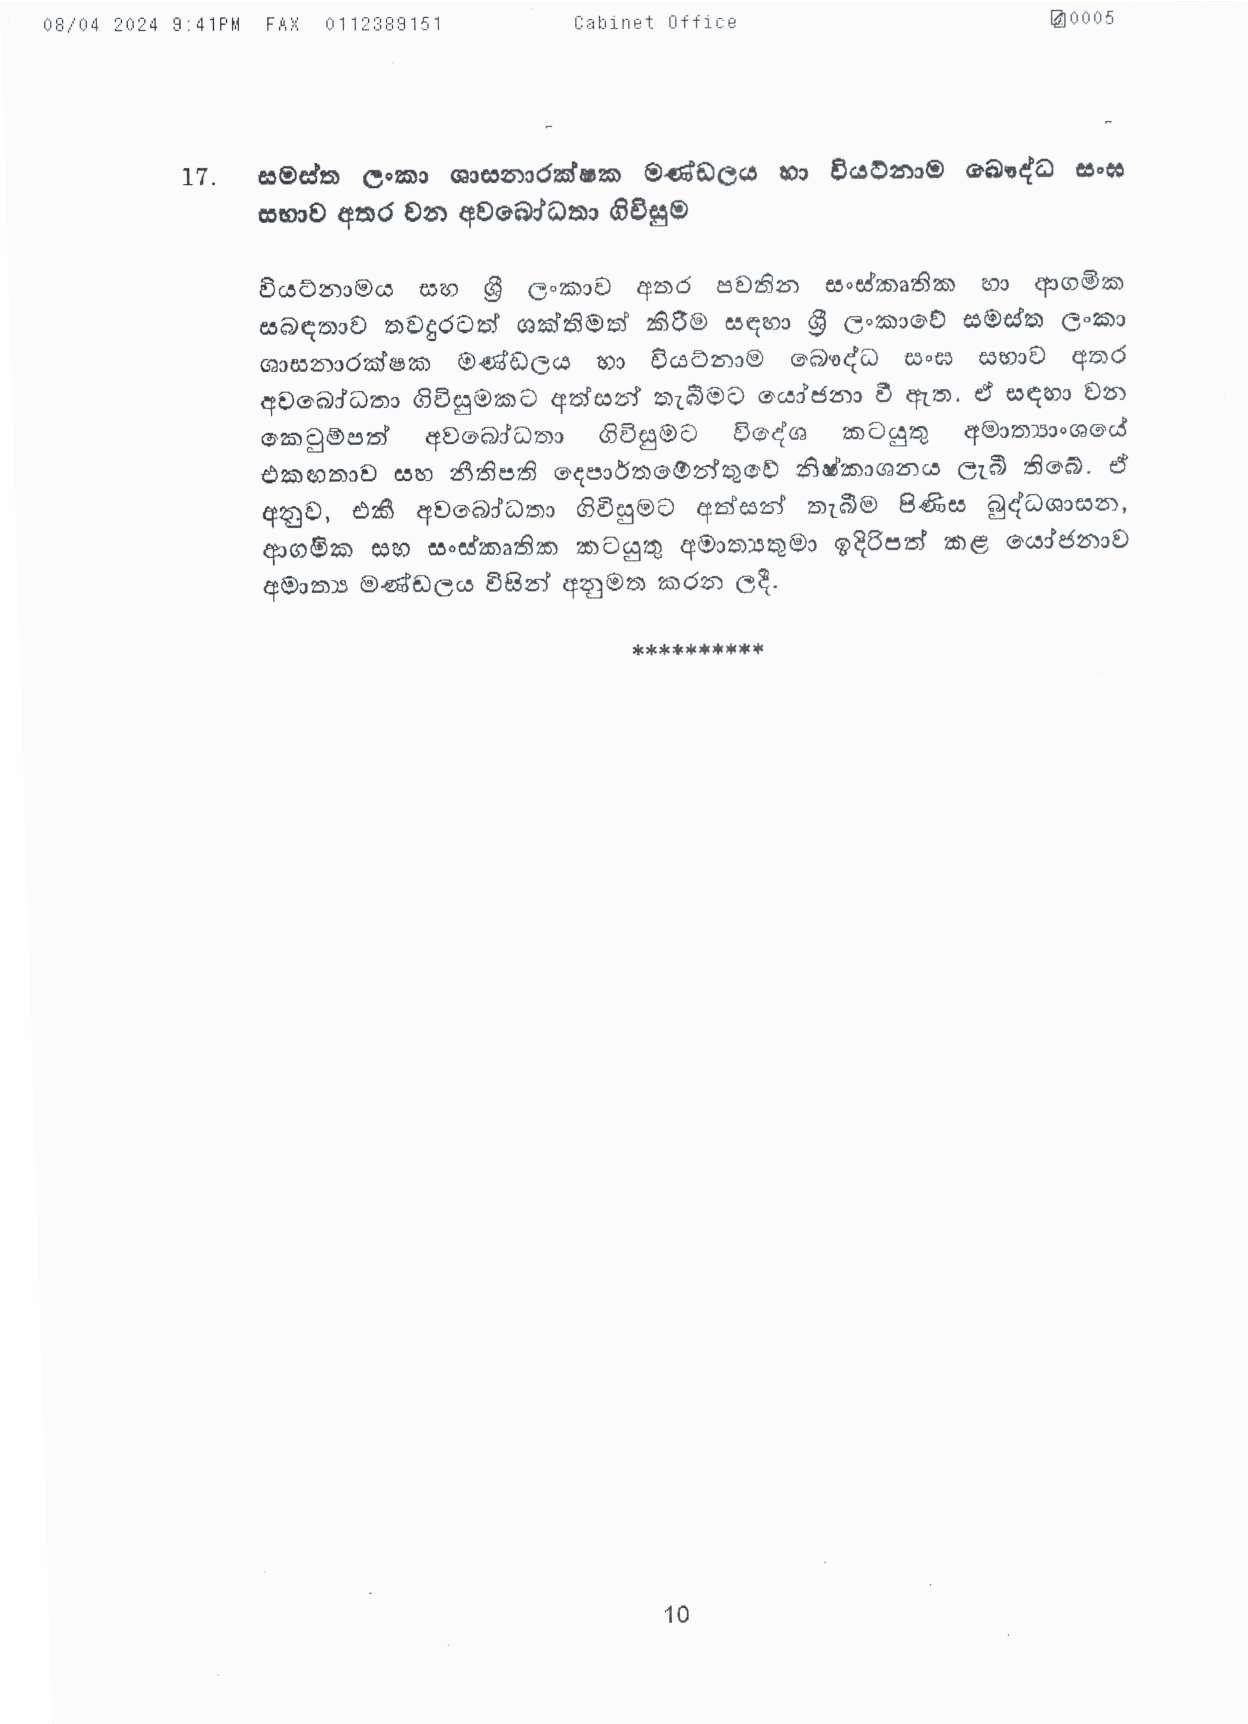 Cabinet Decision on 08.04.2024 page 010